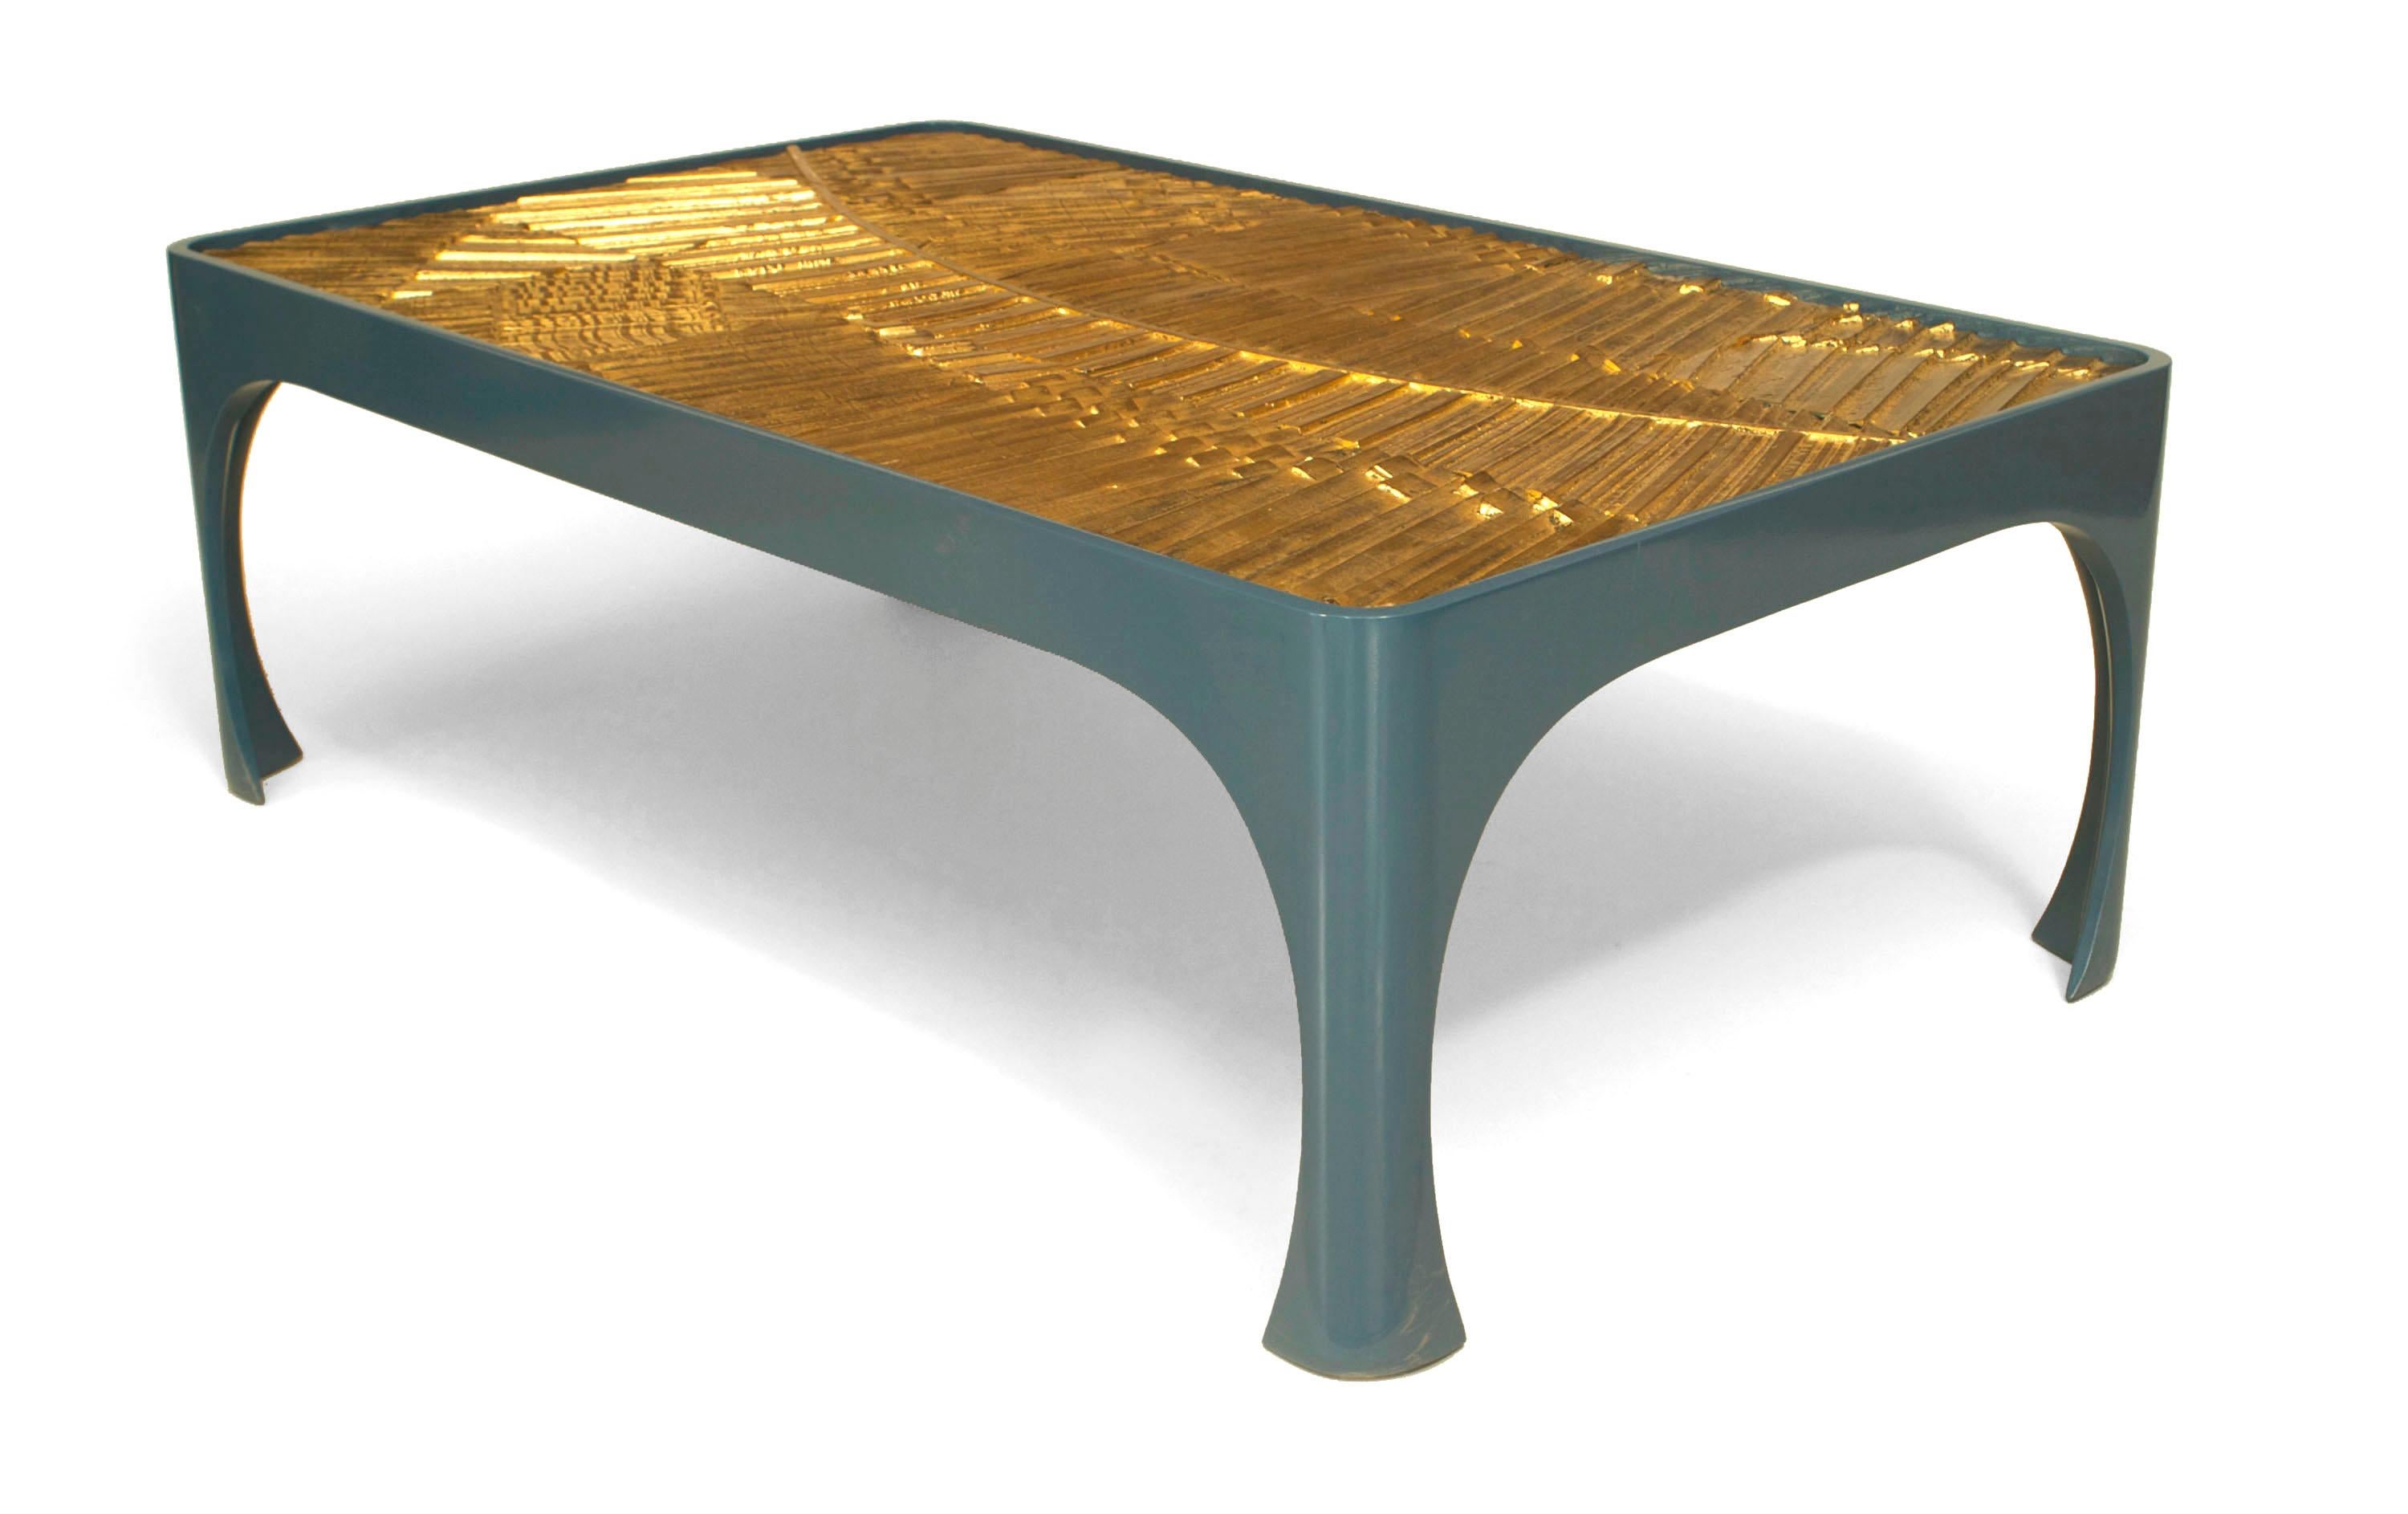 American rectangular coffee table comprising an inset 1970s gilt resin geometric sunburst design panel set in a modern blue lacquered base.